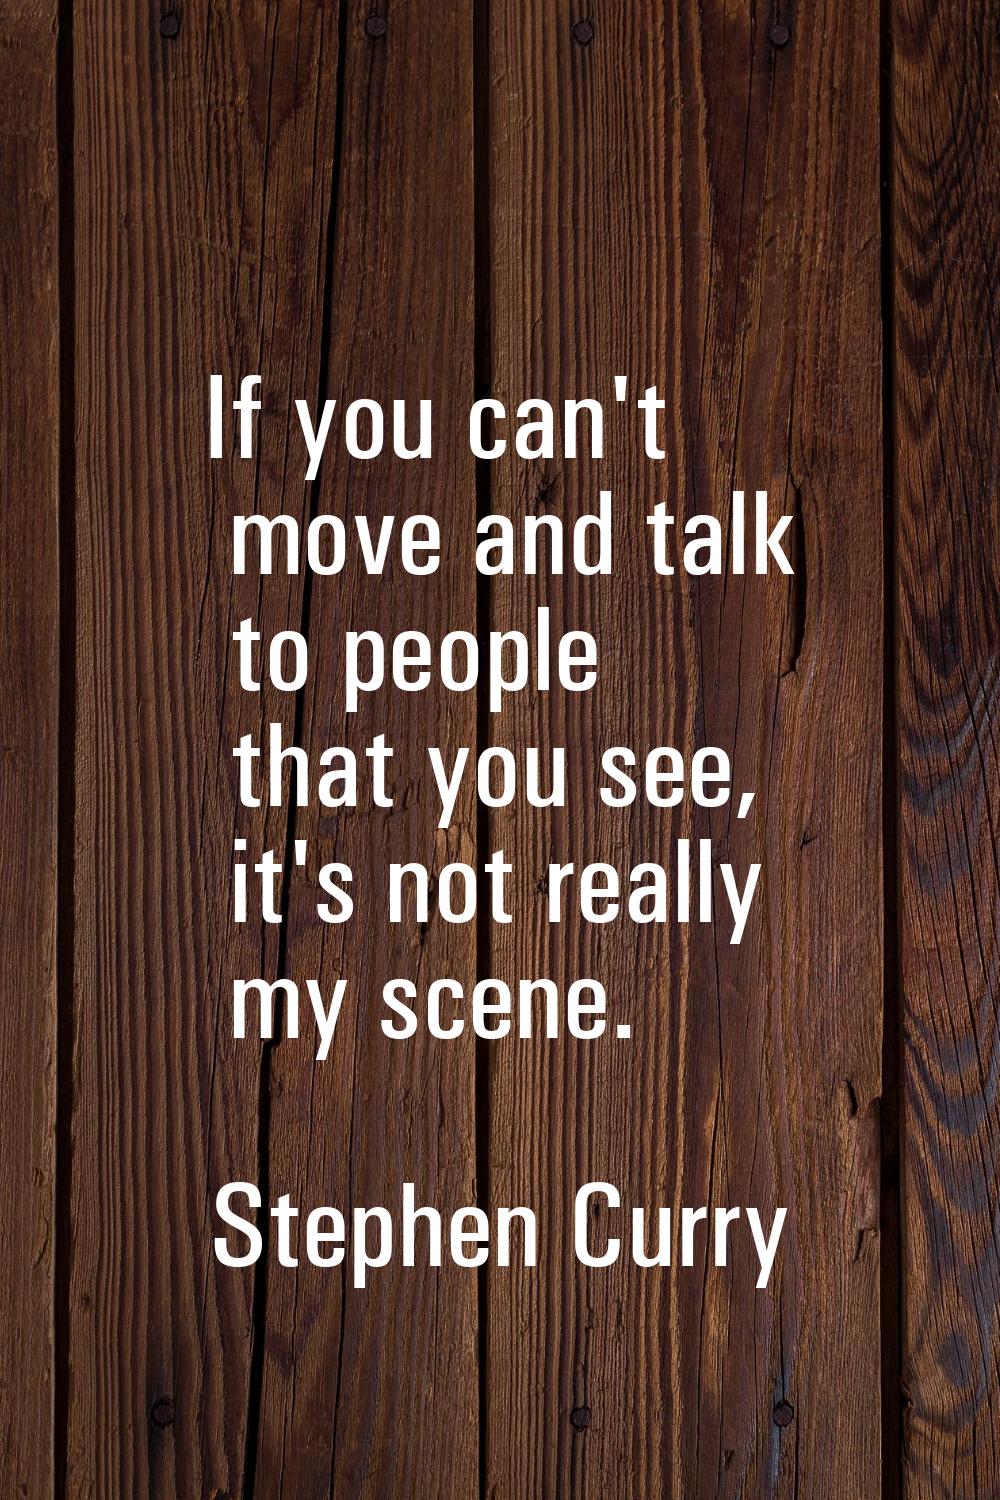 If you can't move and talk to people that you see, it's not really my scene.